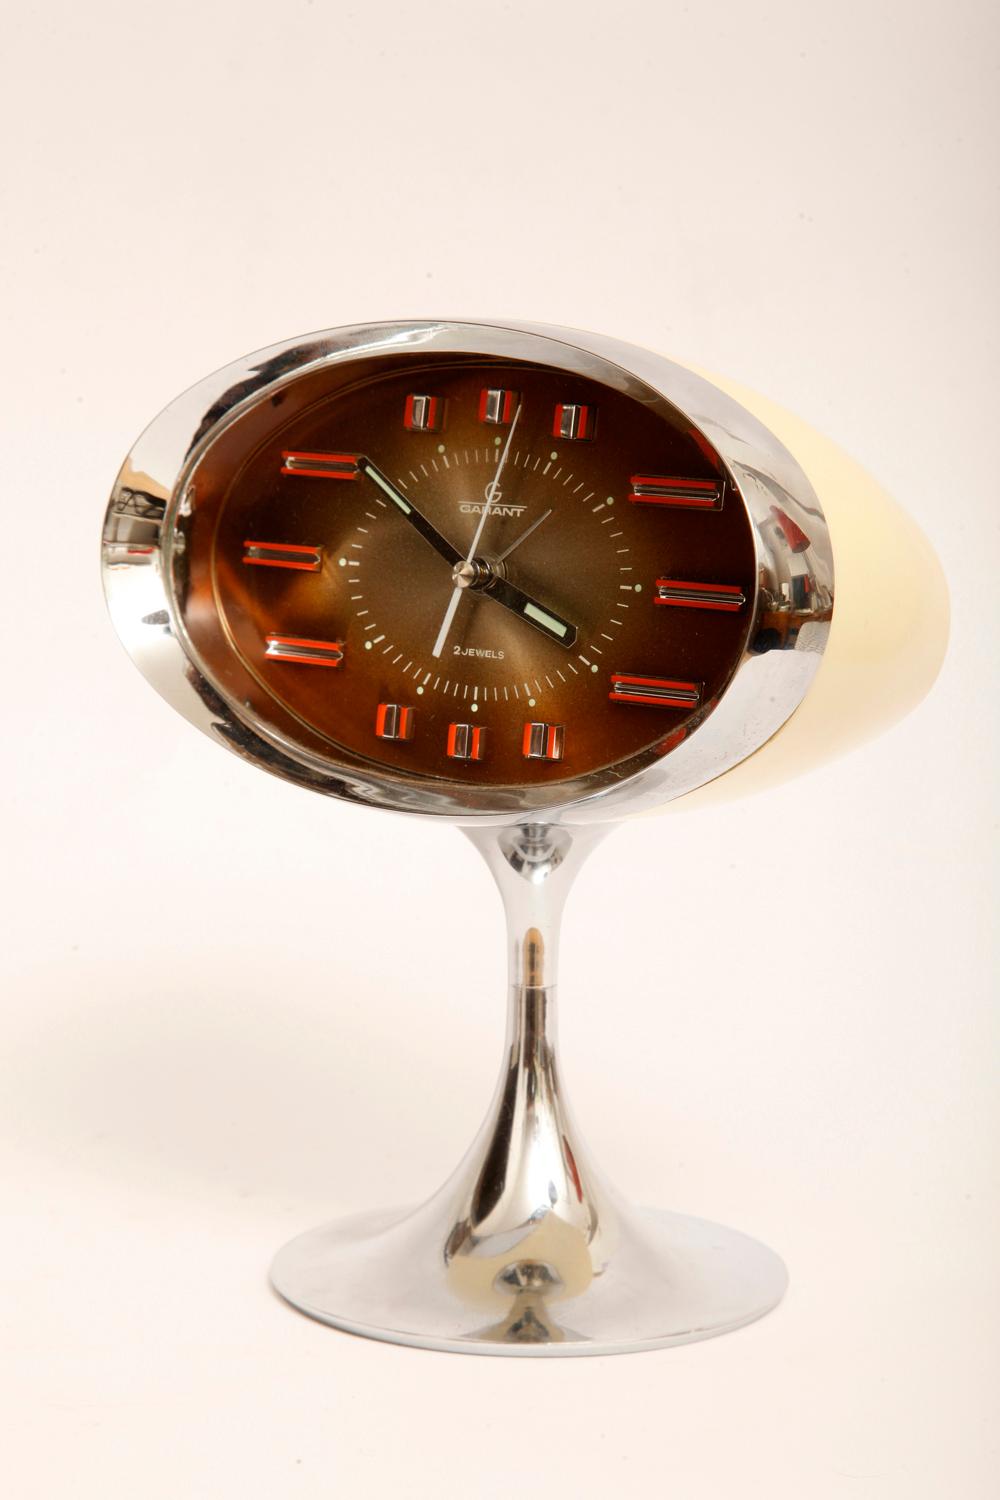 Japanese Space Age Alarm Clock Garant, Plastic and Chromed, 1970s For Sale 13